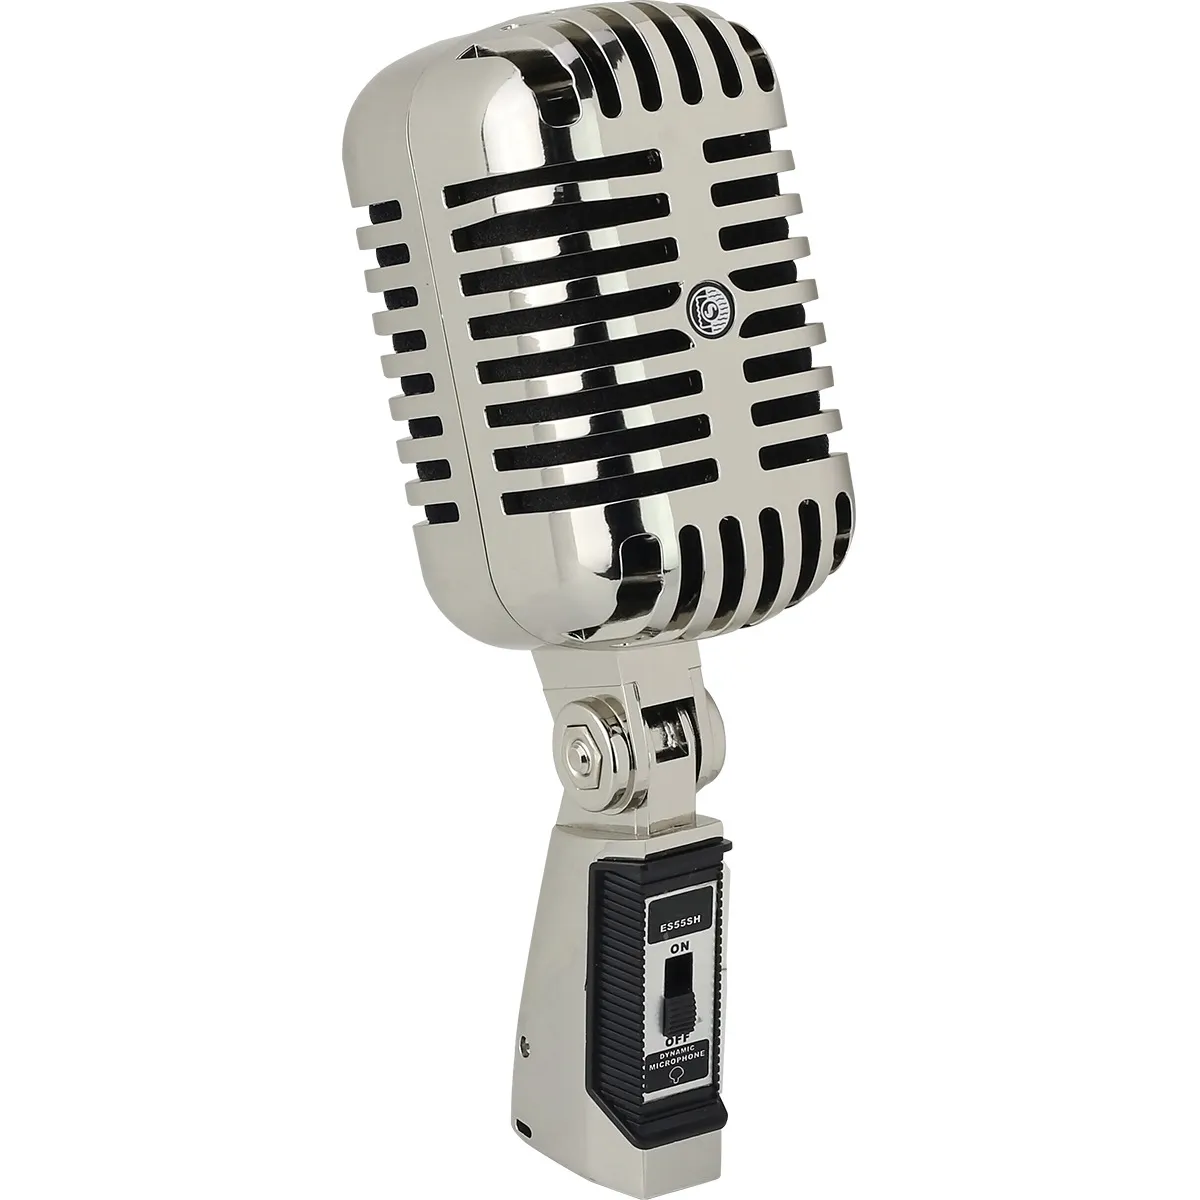 55 sh II classic retro nostalgia microphone 55SH classical swing Professional Dynamic Wired Mikrofone Vocal With Switch acoustic recording and podcasting sound